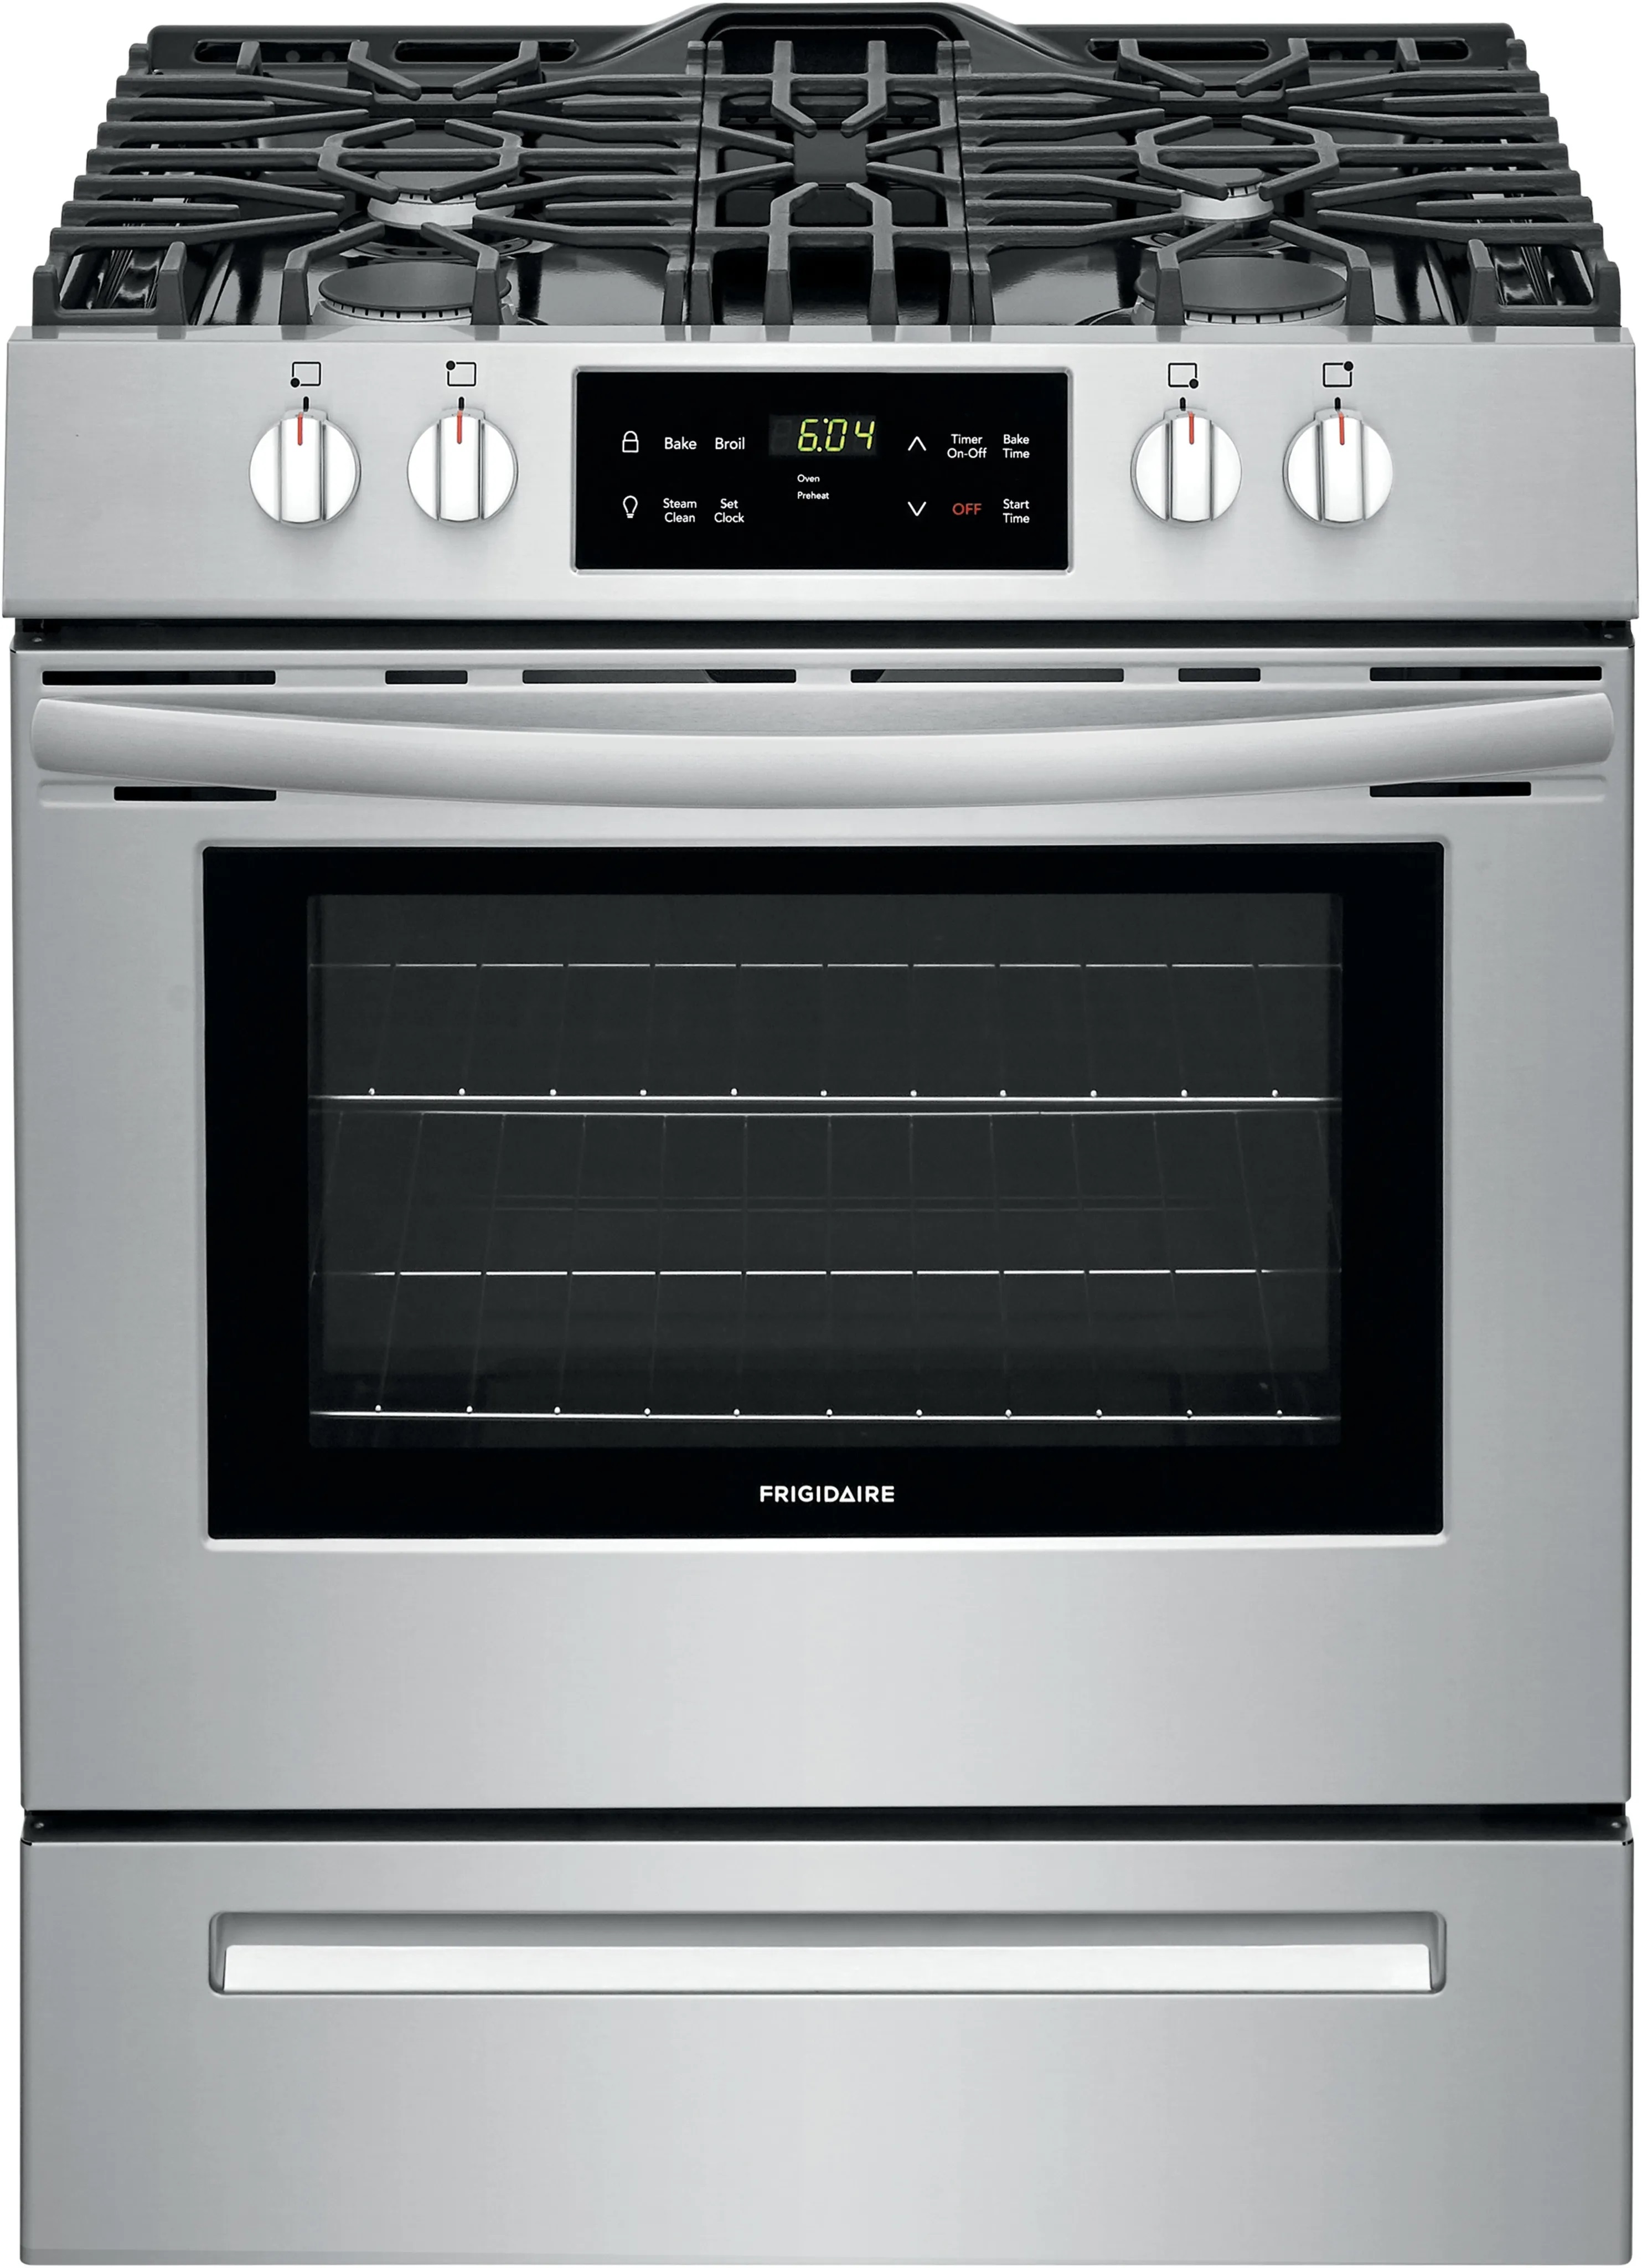 Front view of Frigidaire FFGH3051VS 30” freestanding gas range 